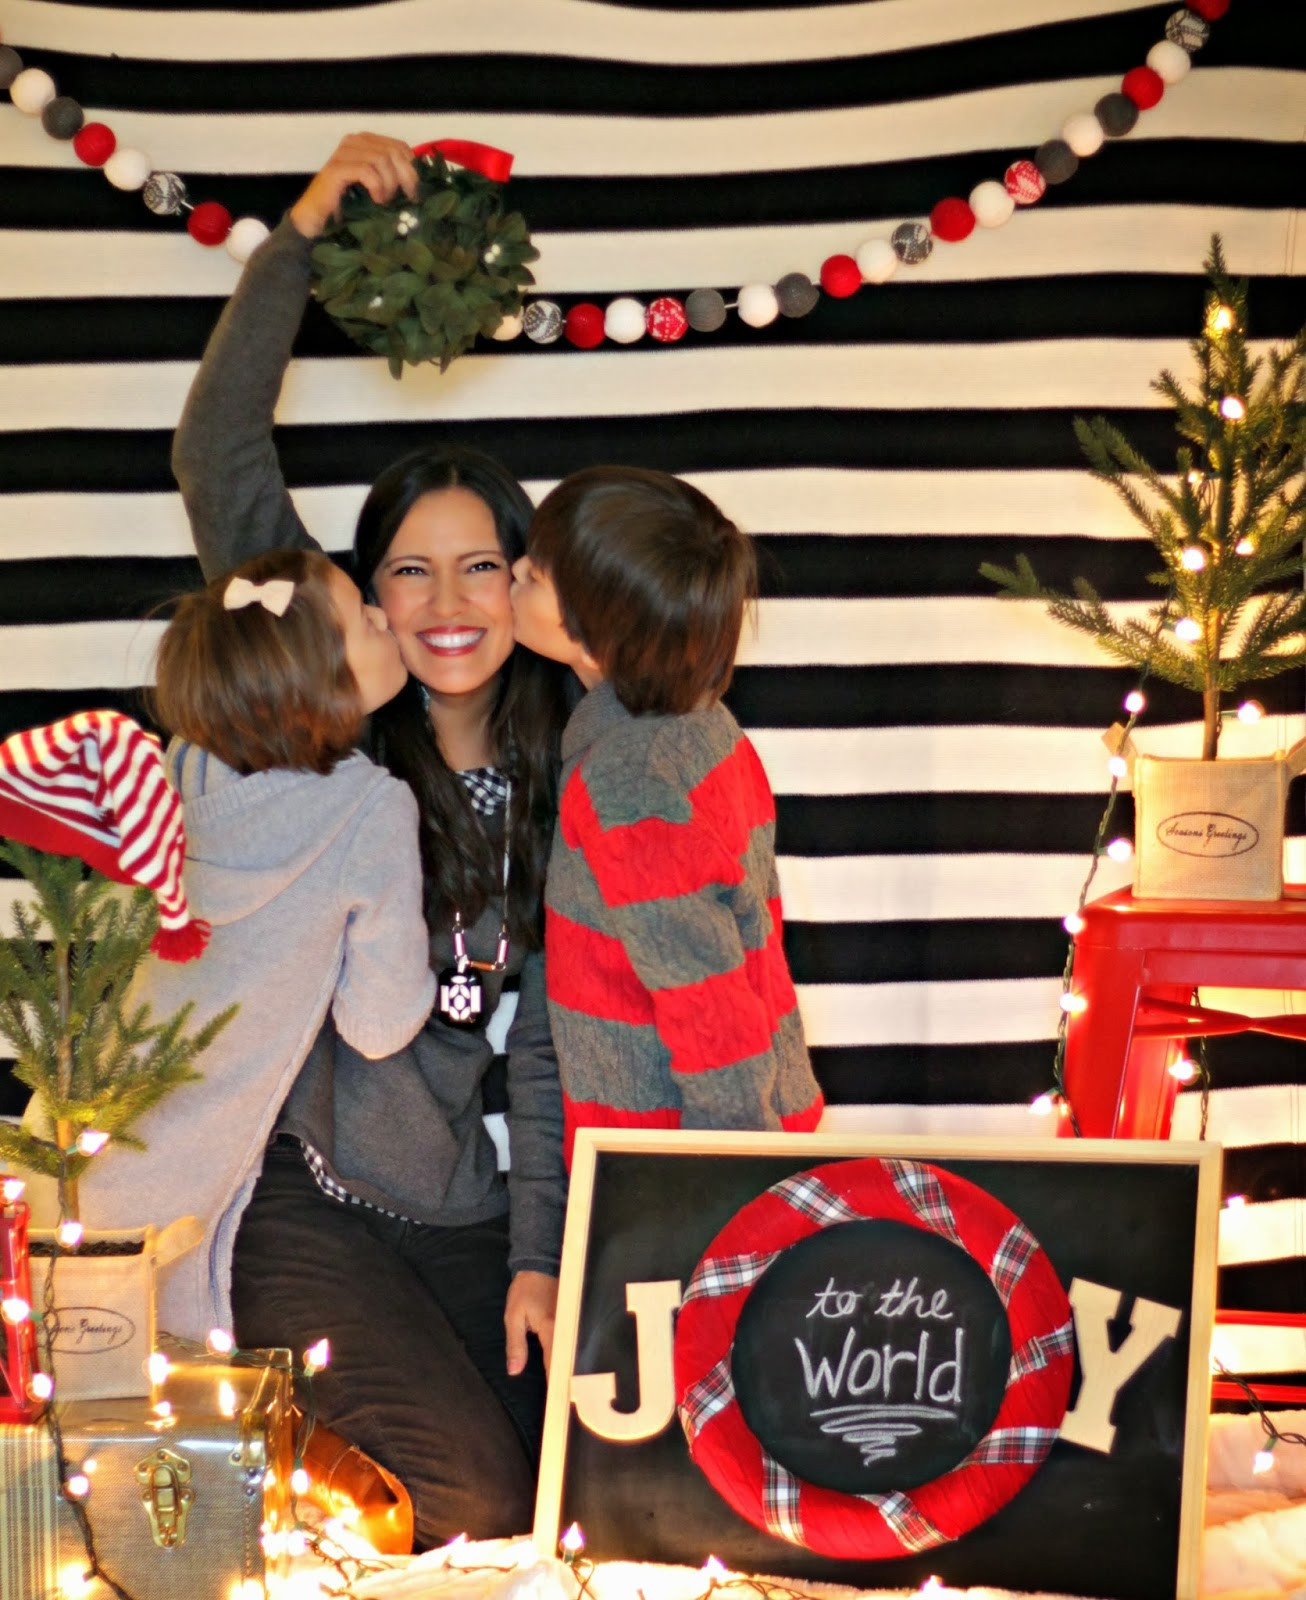 DIY Christmas Photo Backdrop
 Our Fifth House easy christmas photo backdrop